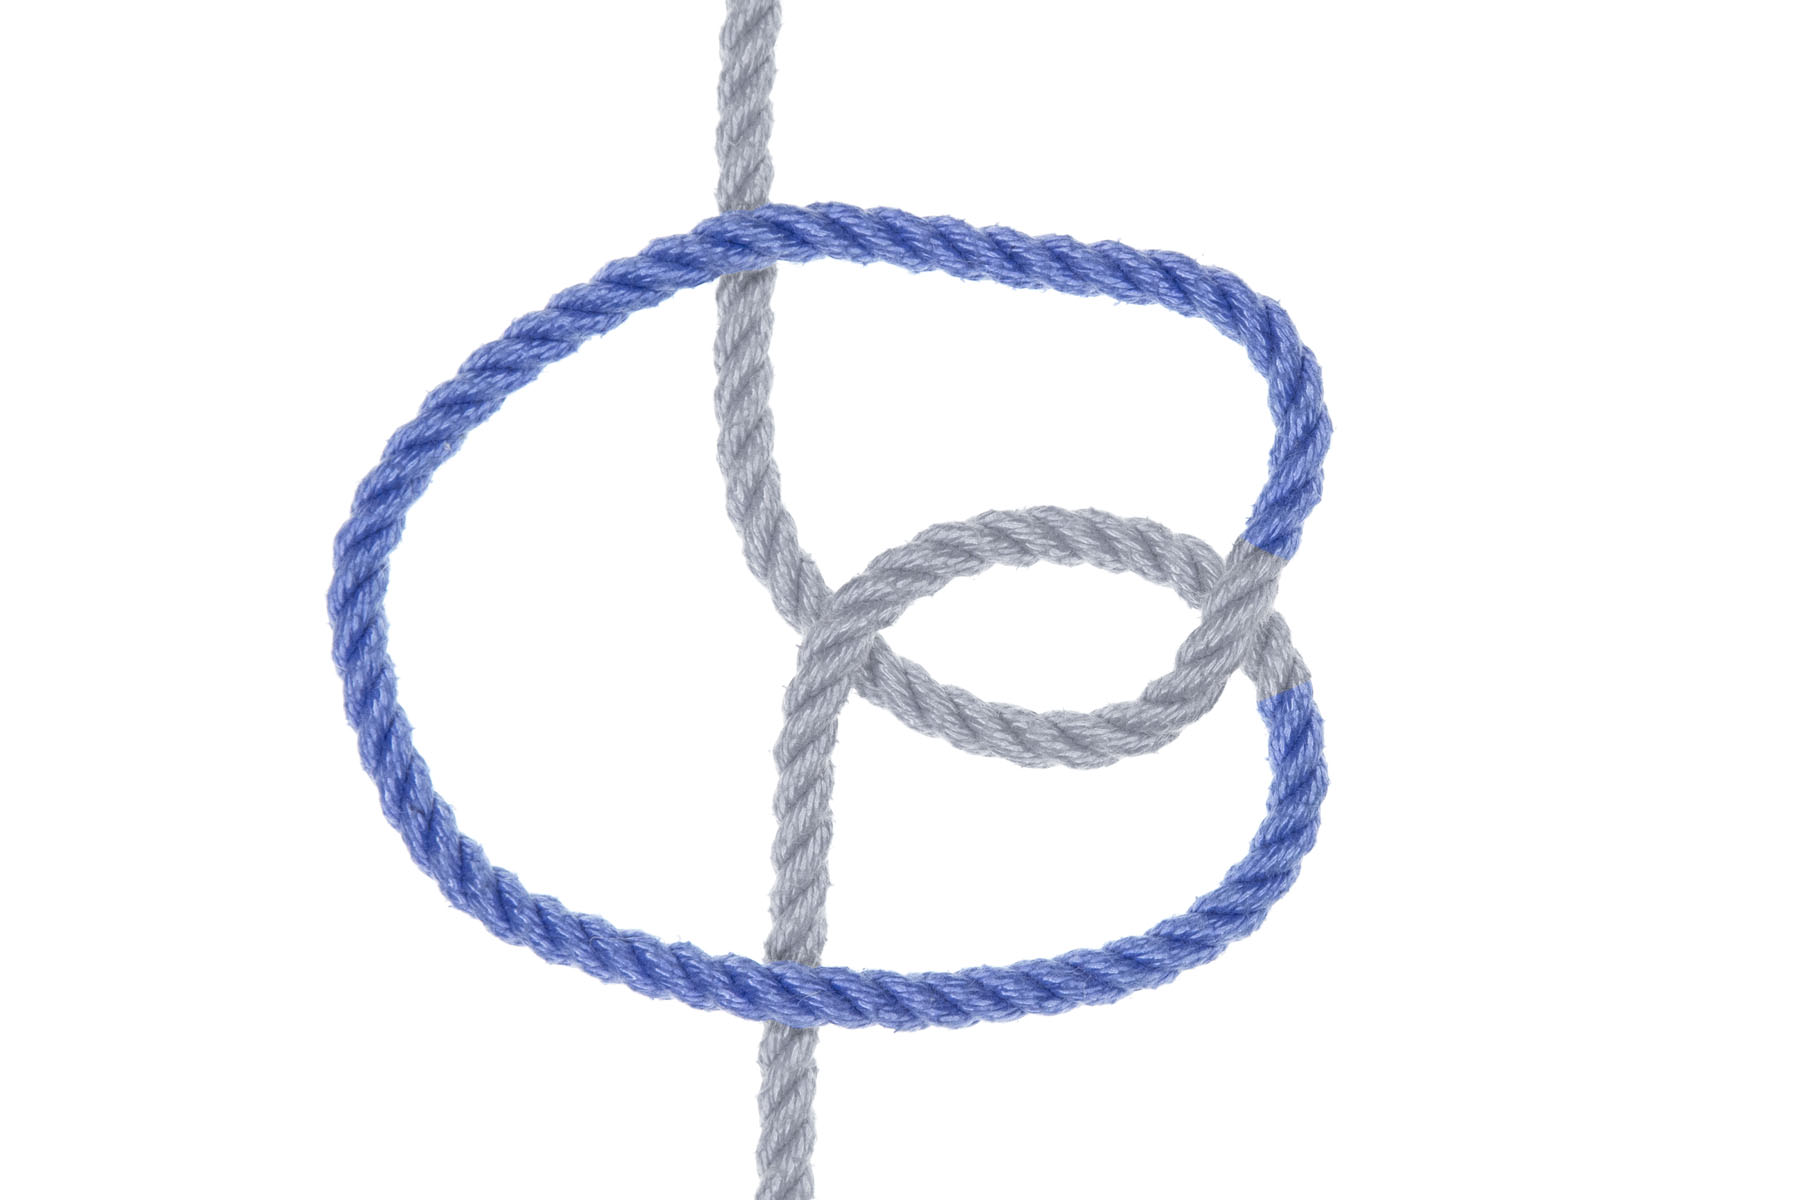 The vertical ends of the rope and the first part of the bight are unchanged. But right after the second twist, the larger part of the bight has been flipped over so it points to the left. This part of the bight now encircles the first twist and crosses over the vertical ends of the rope.